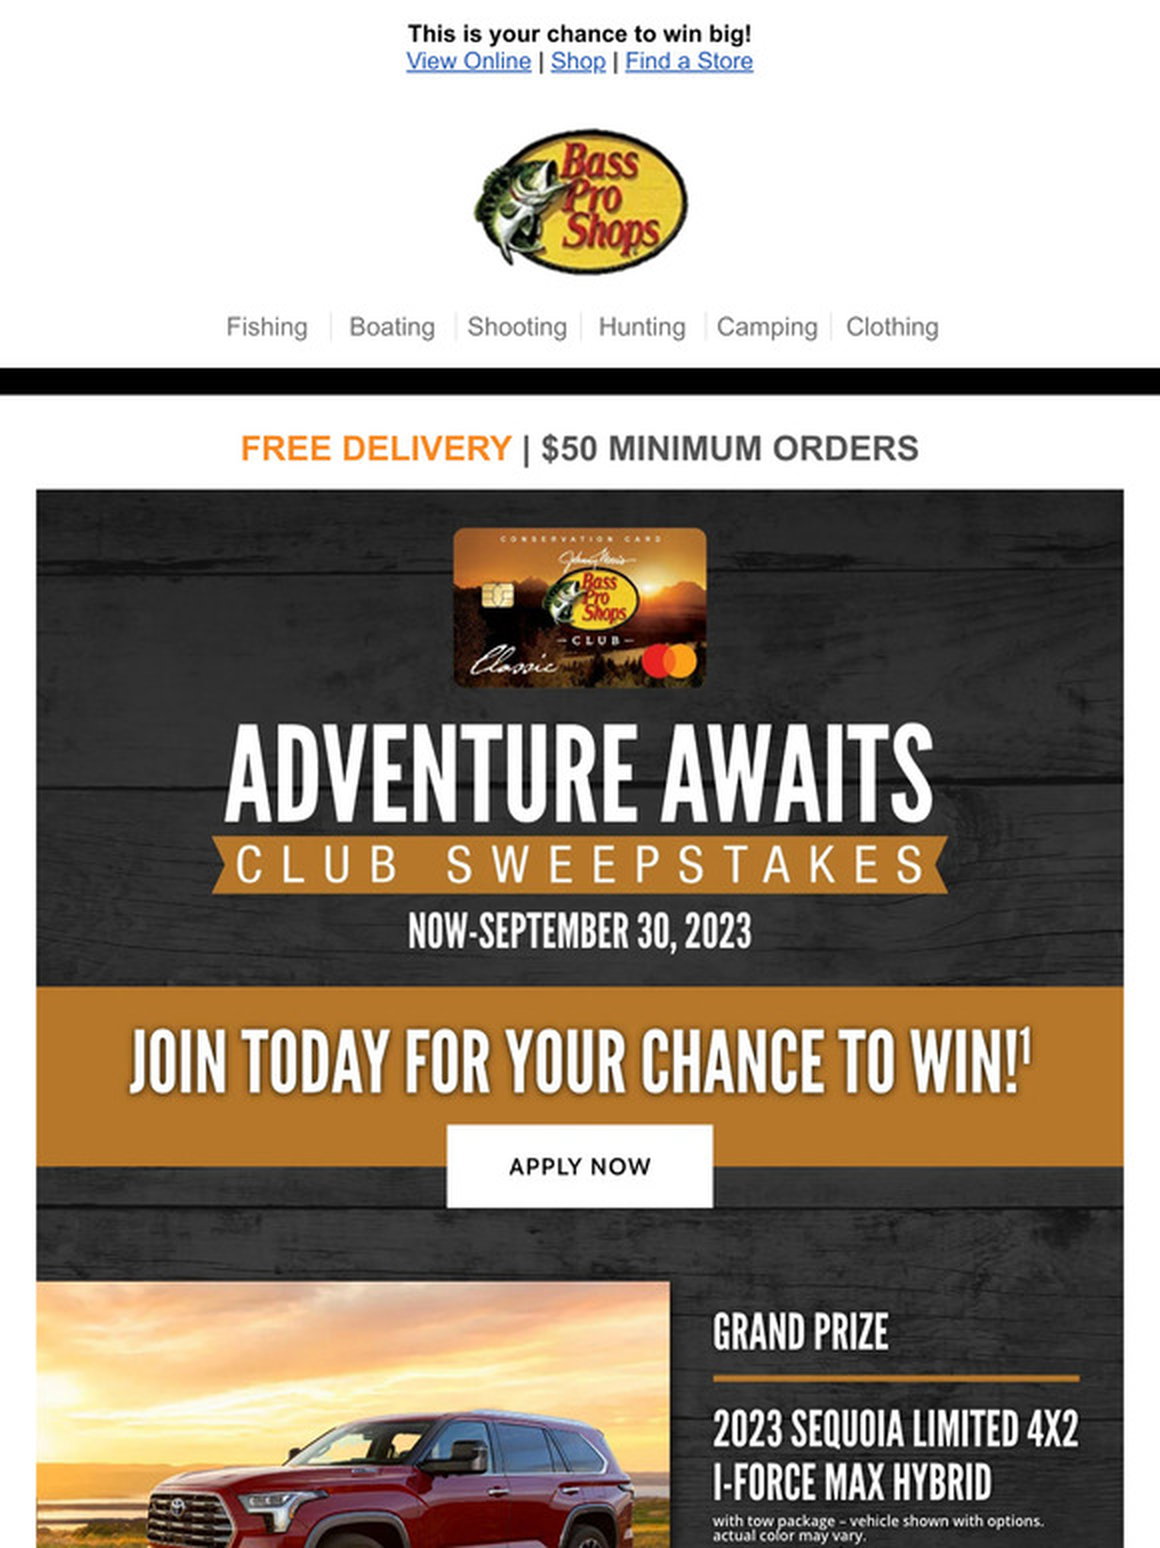 Bass Pro Shops: Drive Into Adventure With These Prizes